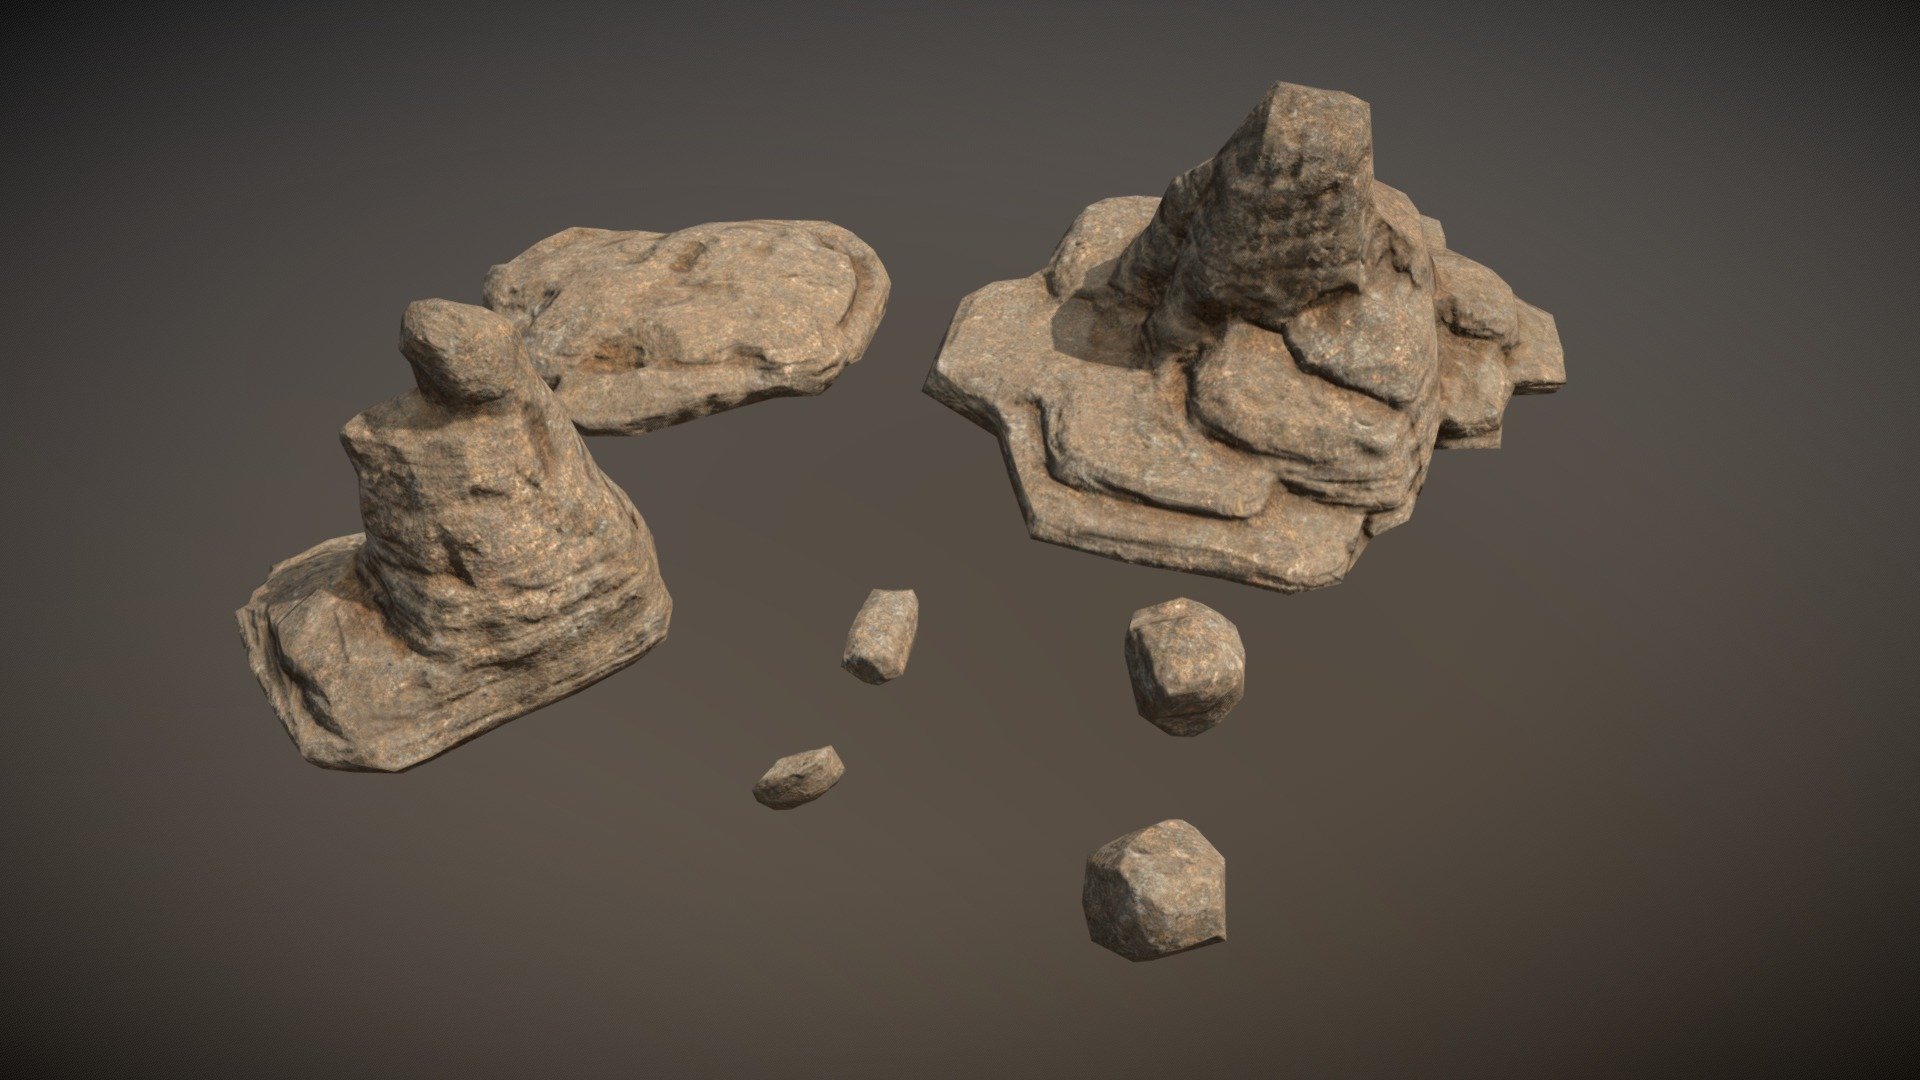 Lowpoly sandstone Kit

collection of 7 unique building blocks / cliff/stone assets




FBX

OBJ

Blender

Max 2017 V-ray



Poly Total: 1735

Vert total: 933

Color, normal, Metallic, Roughness, Hight,occlusion :  4K JPG Textures - Lowpoly sandstone Kit - Buy Royalty Free 3D model by 3drille 3d model